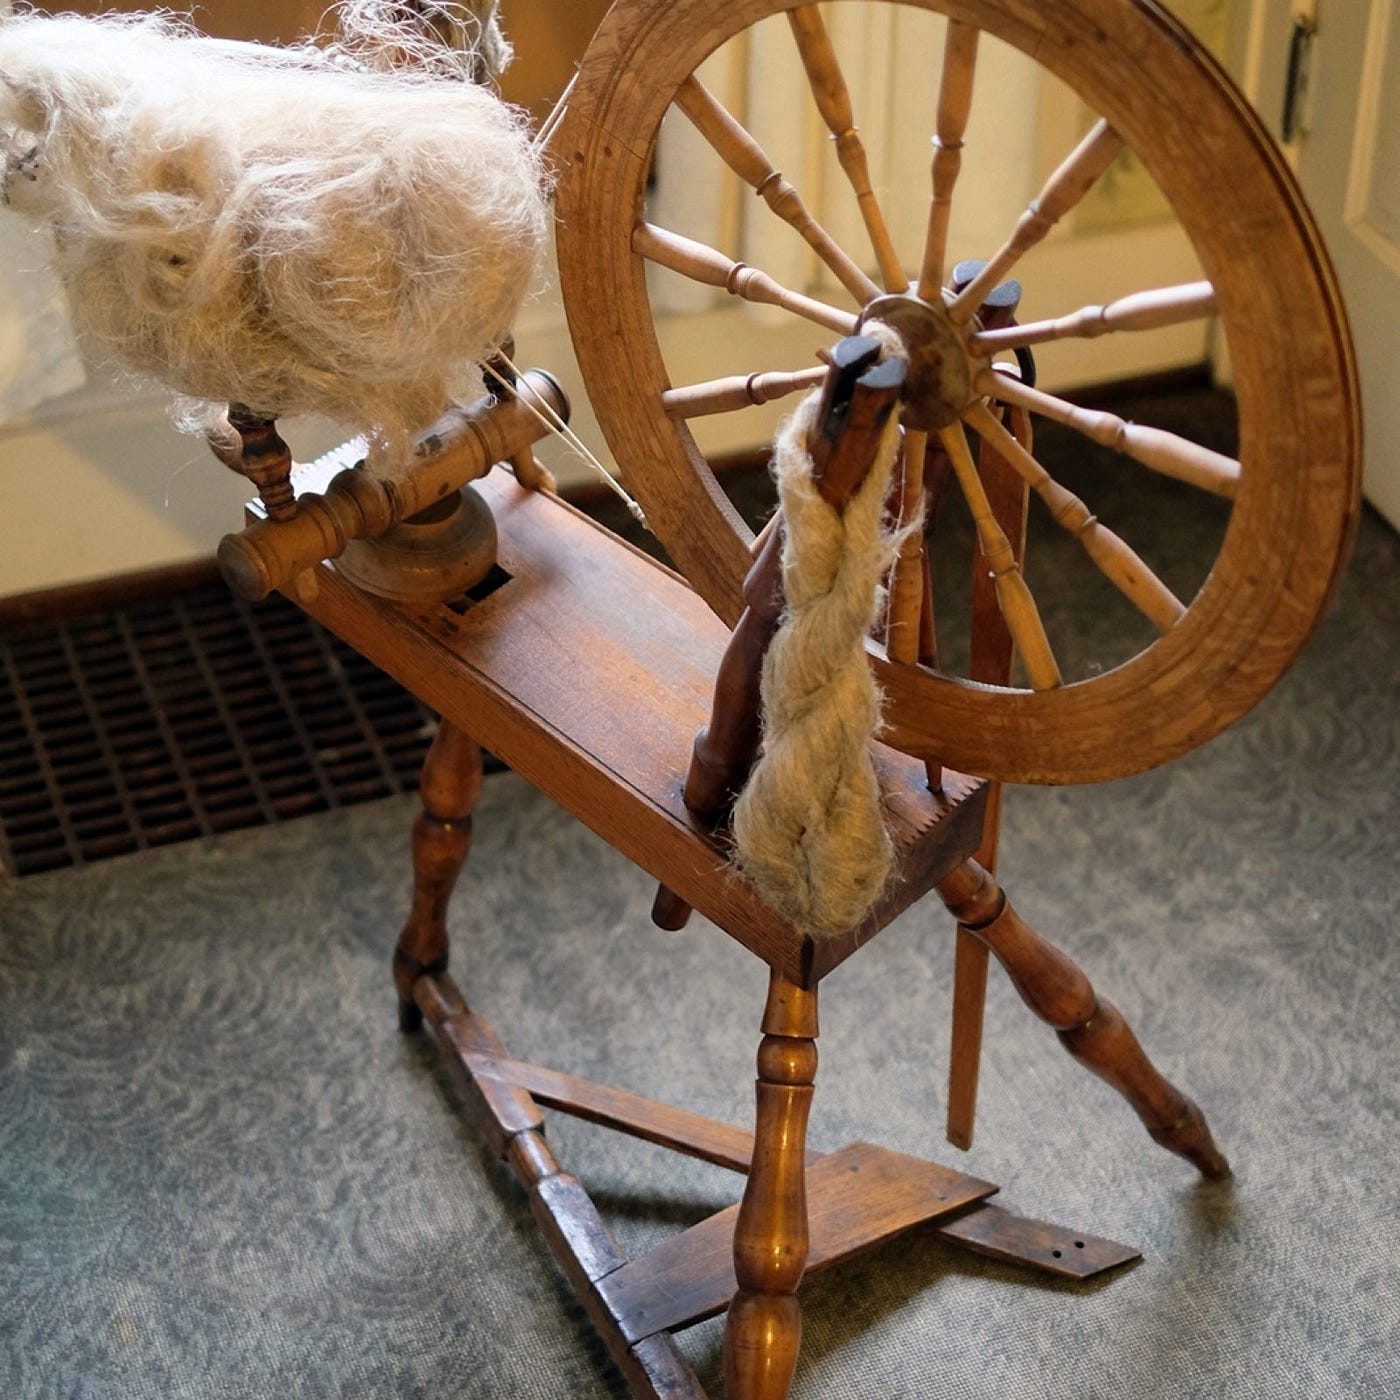 What is the spindle on a spinning wheel? - Quora